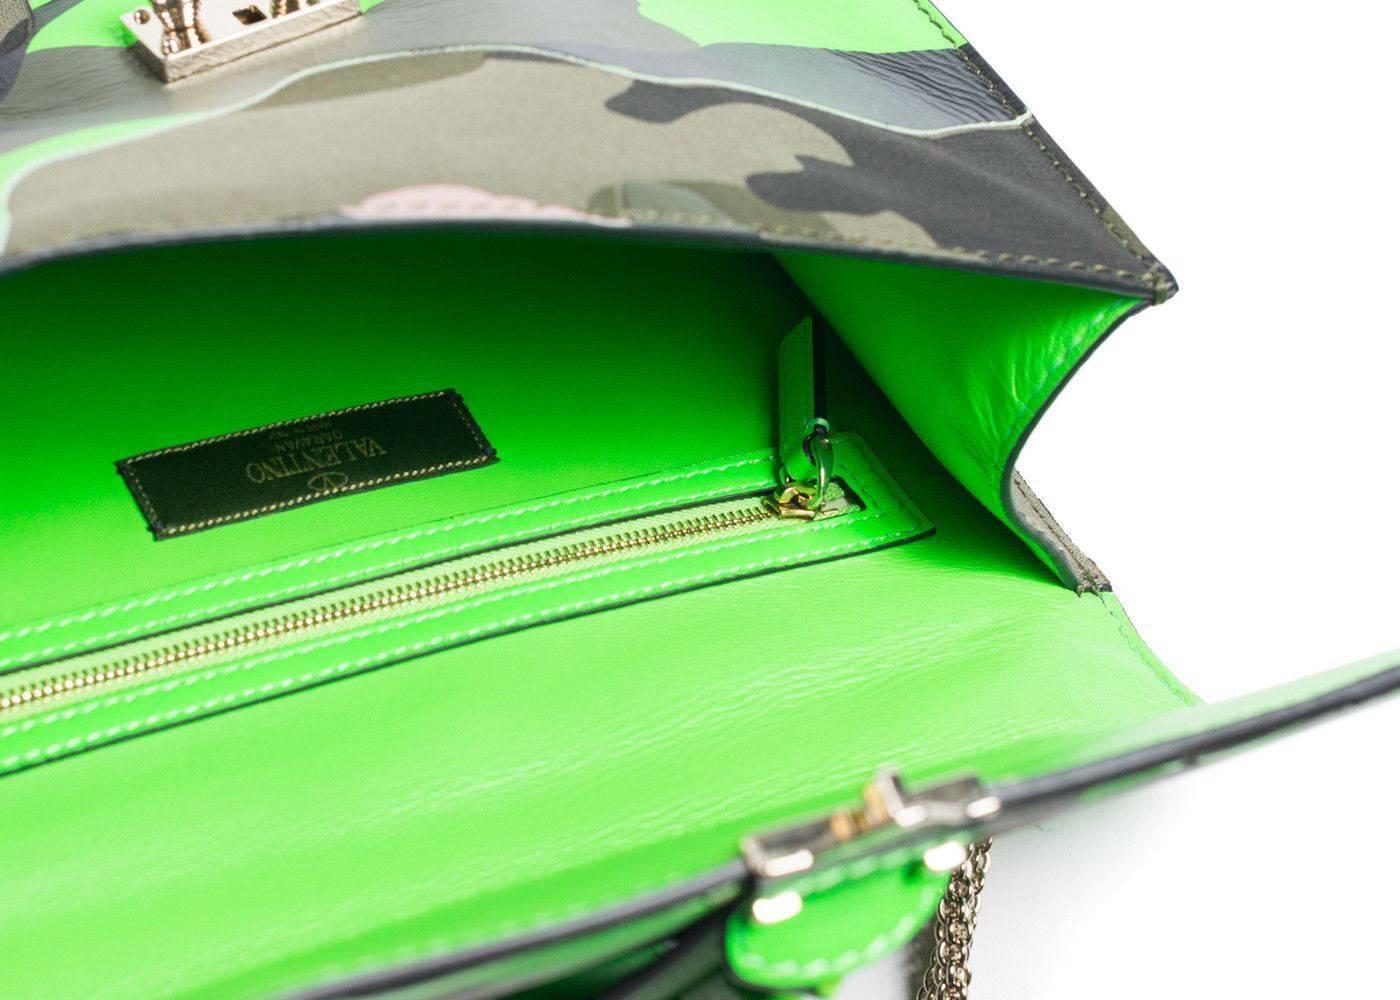 Brand New Valentino Neon Green Camo Rocklock Shoulder Bag
Original with Tags and Sleeper Bag
Retails in Stores & Online for $2395
Size: 10.5 W x 3 D x 7 H

Valentino's vibrantly updated Rocklock Bag is a must have essential. This camouflaged